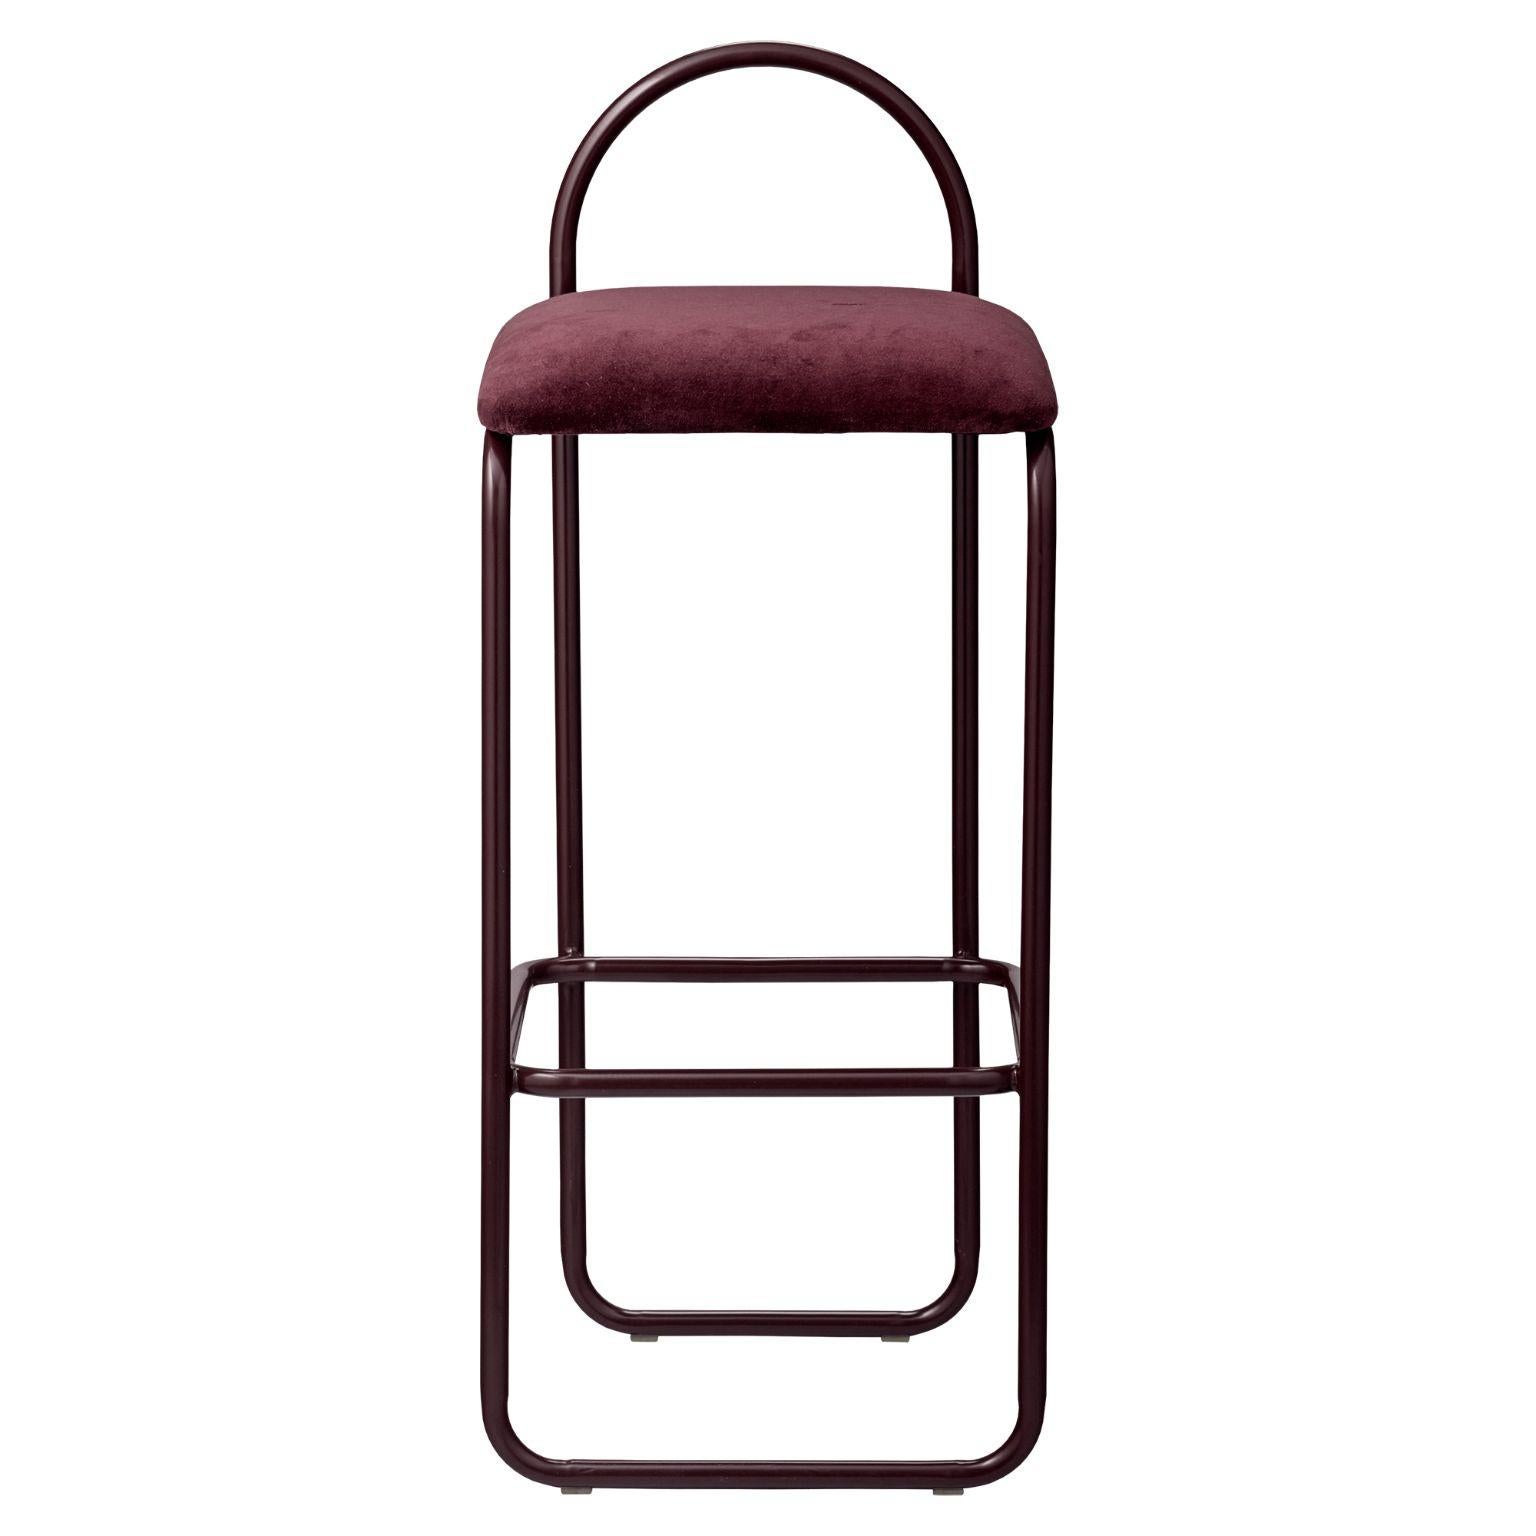 Bordeaux velvet Minimalist bar chair 82.5
Dimensions: L 37 x W 39 x H 82.5 CM
Materials: Velvet, steel

The collection includes benches, chairs, shelves and mirrors in a wide variety of sizes.